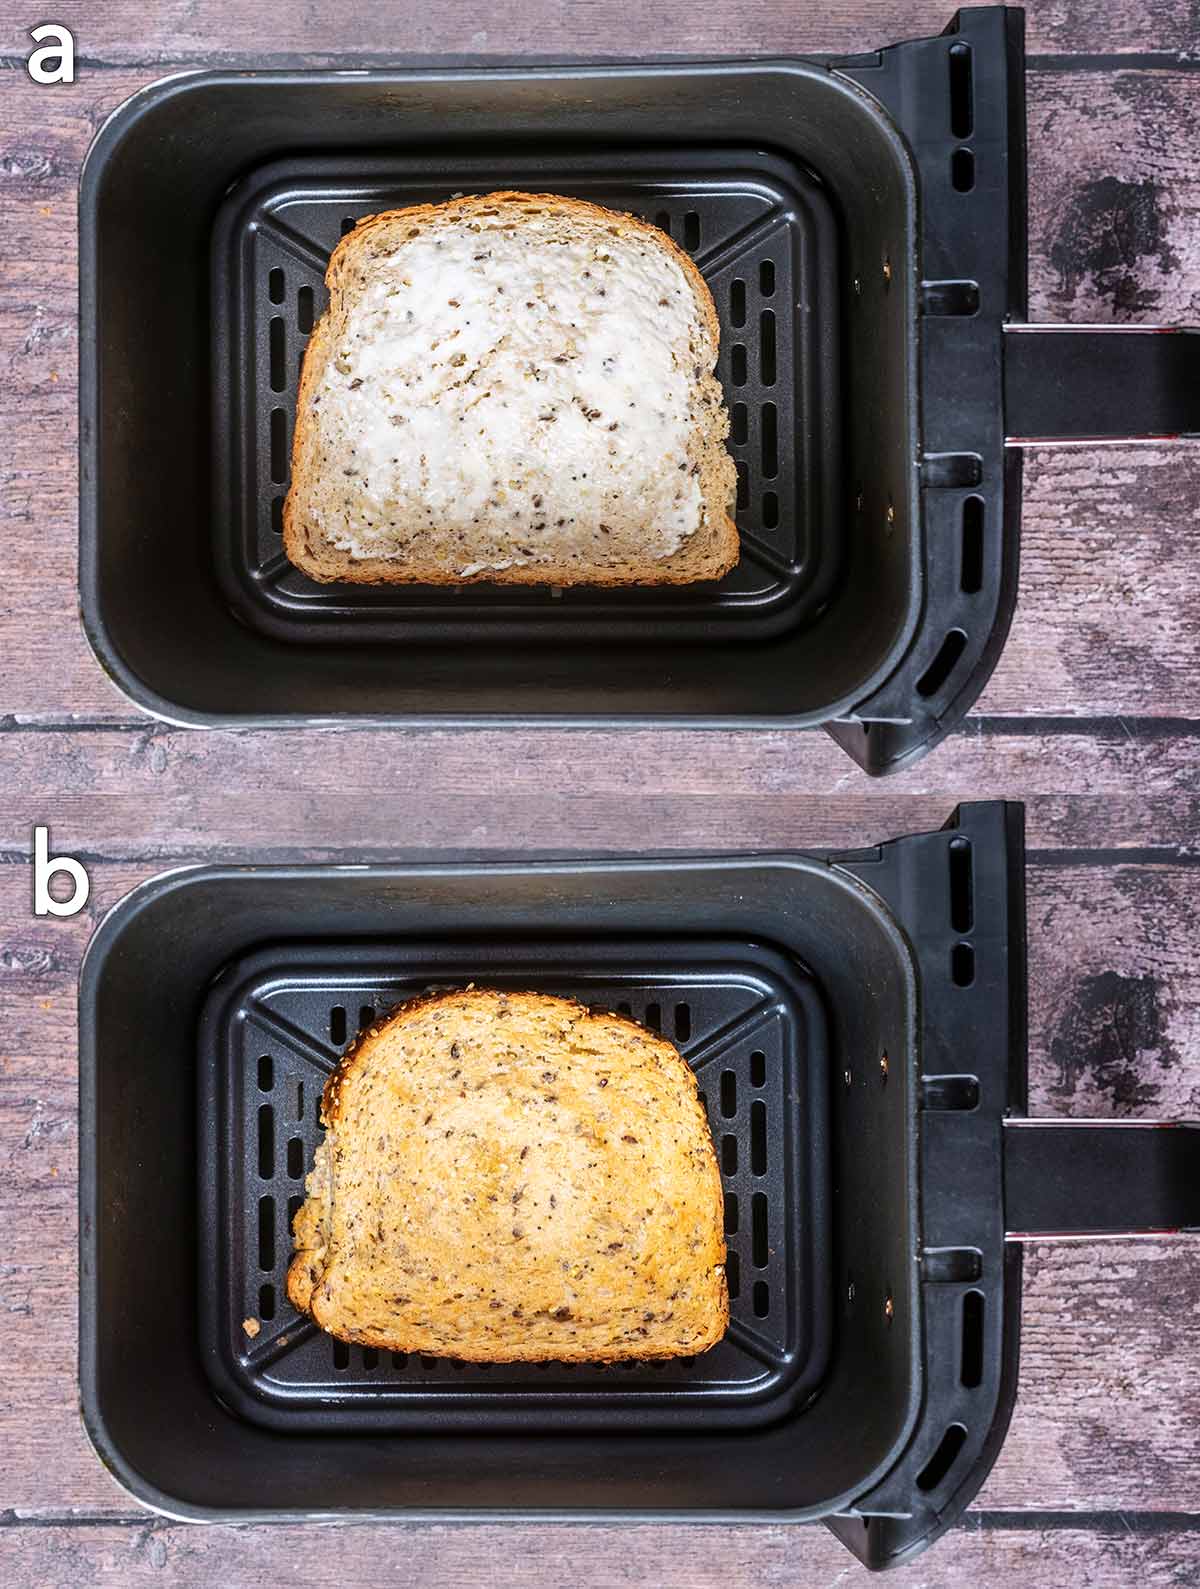 Two shot collage of a cheese and tuna sandwich in an air fryer, before and after cooking.